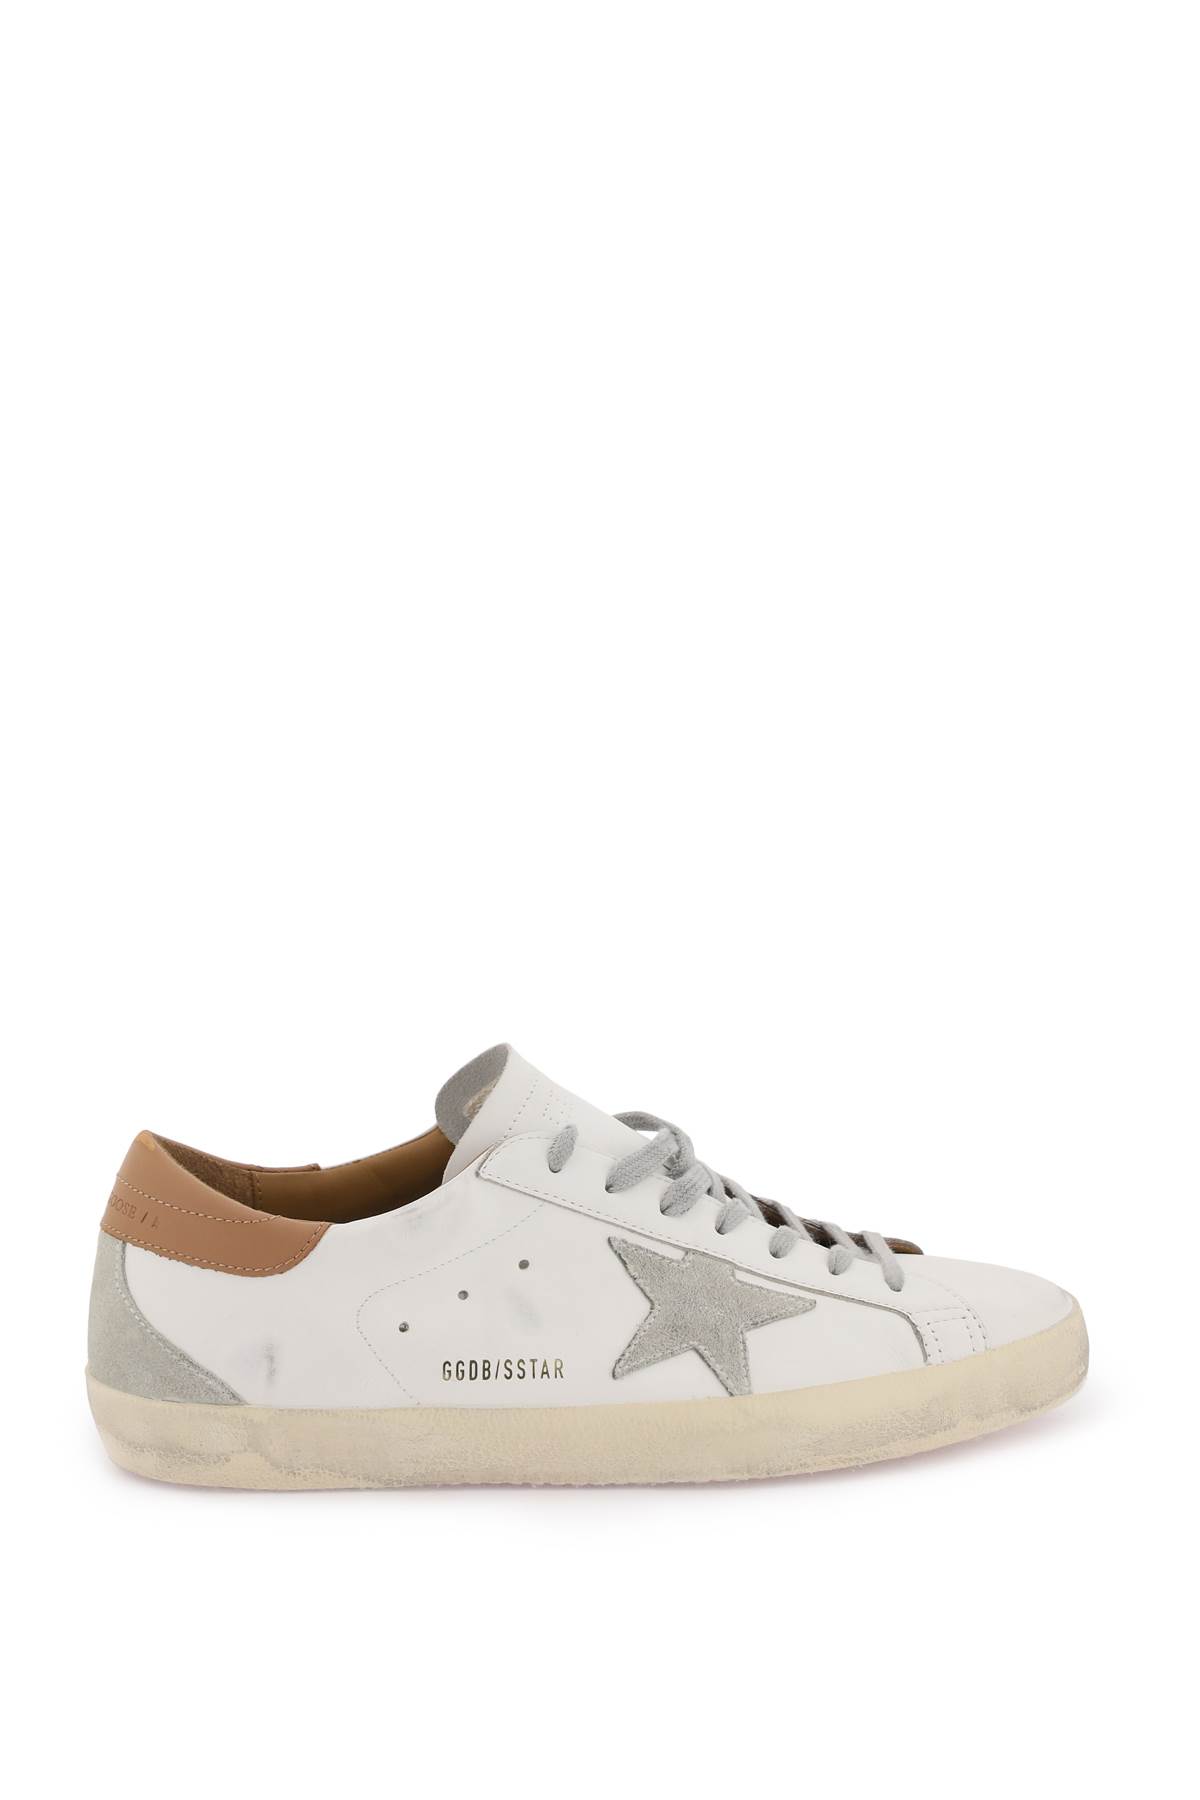 Shop Golden Goose Super-star Sneakers In White Ice Light Brown (white)